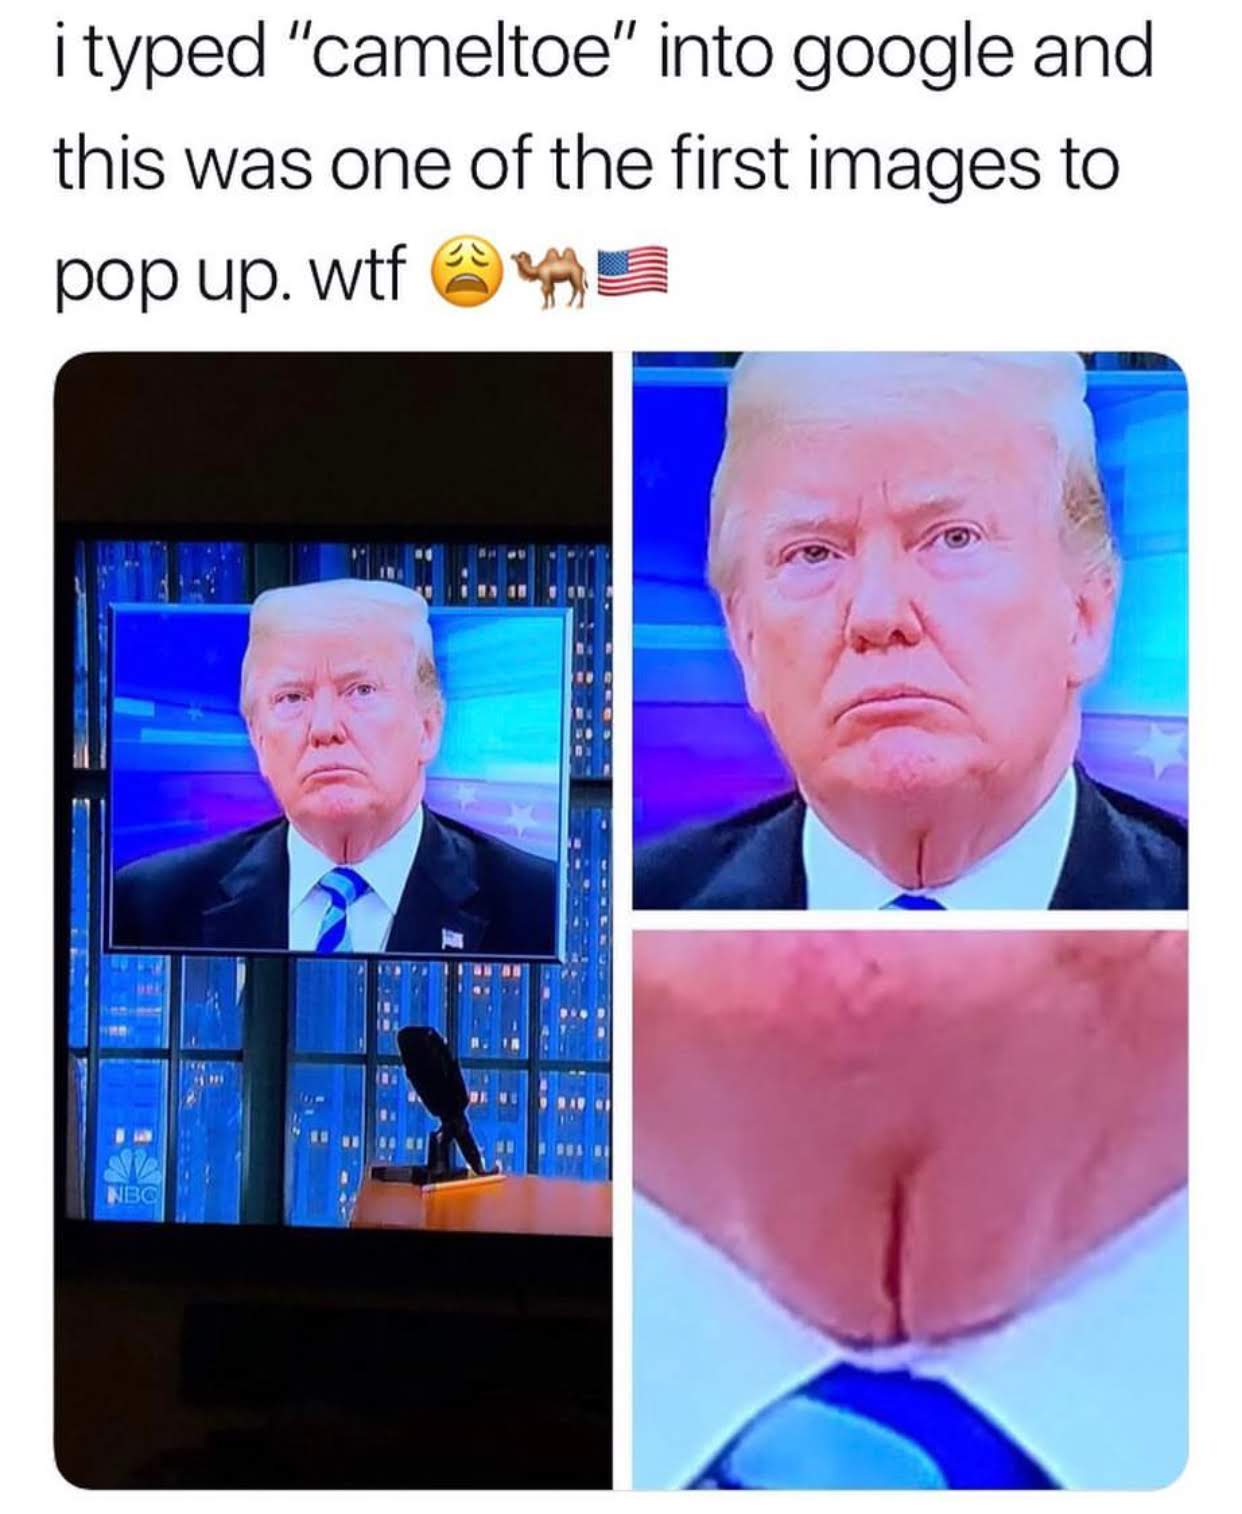 memes - donald trump vagineck - i typed "cameltoe" into google and this was one of the first images to pop up. wtf @ Nbc